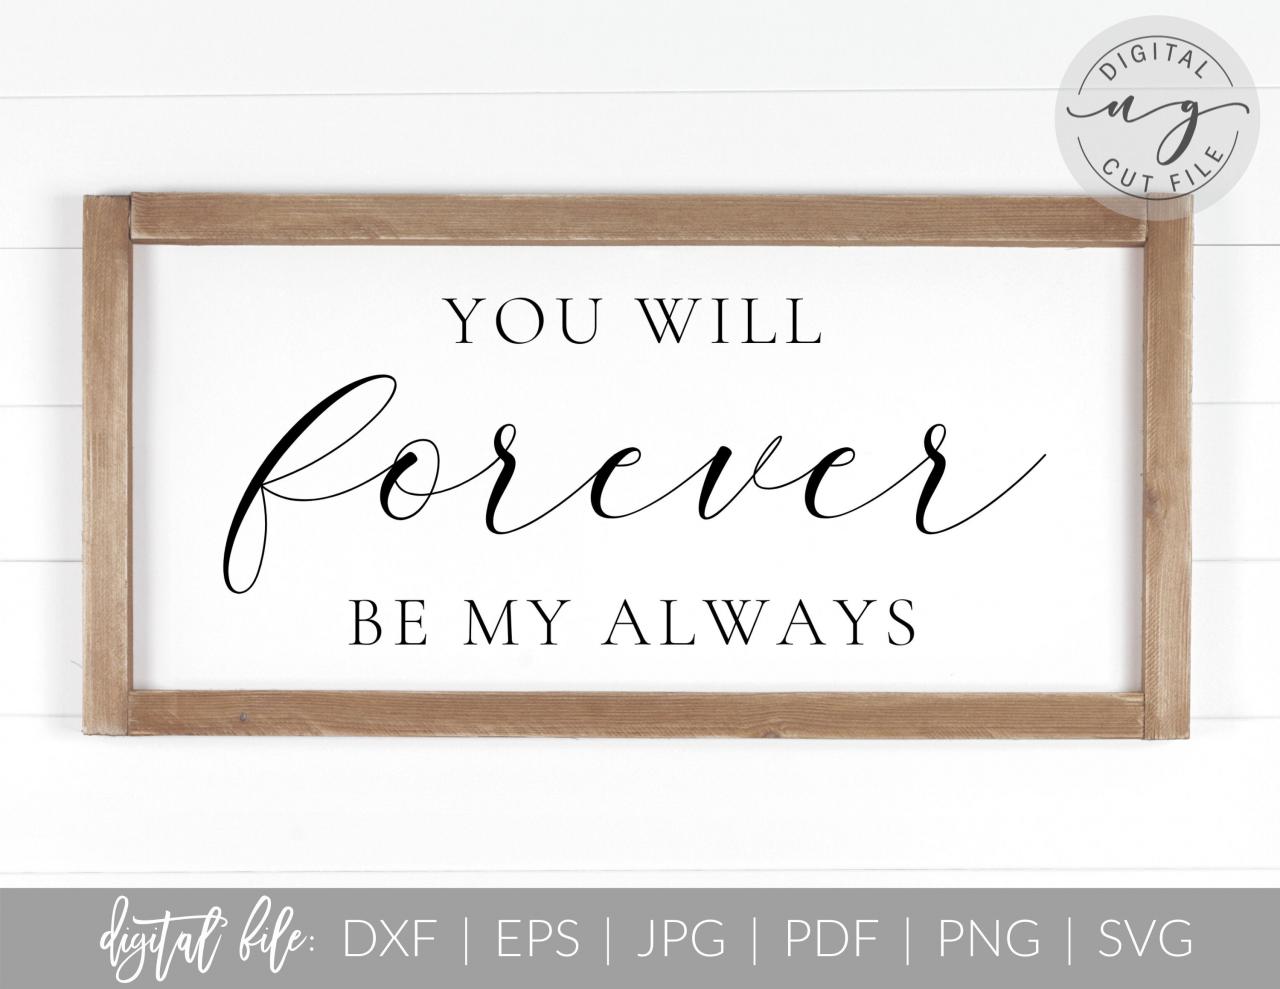 You Will Forever Be My Always | Love Quote | Svg, Dxf Cut File | Pdf Print File | Cricut Cameo Silhouette | Png Clipart | Instant Download